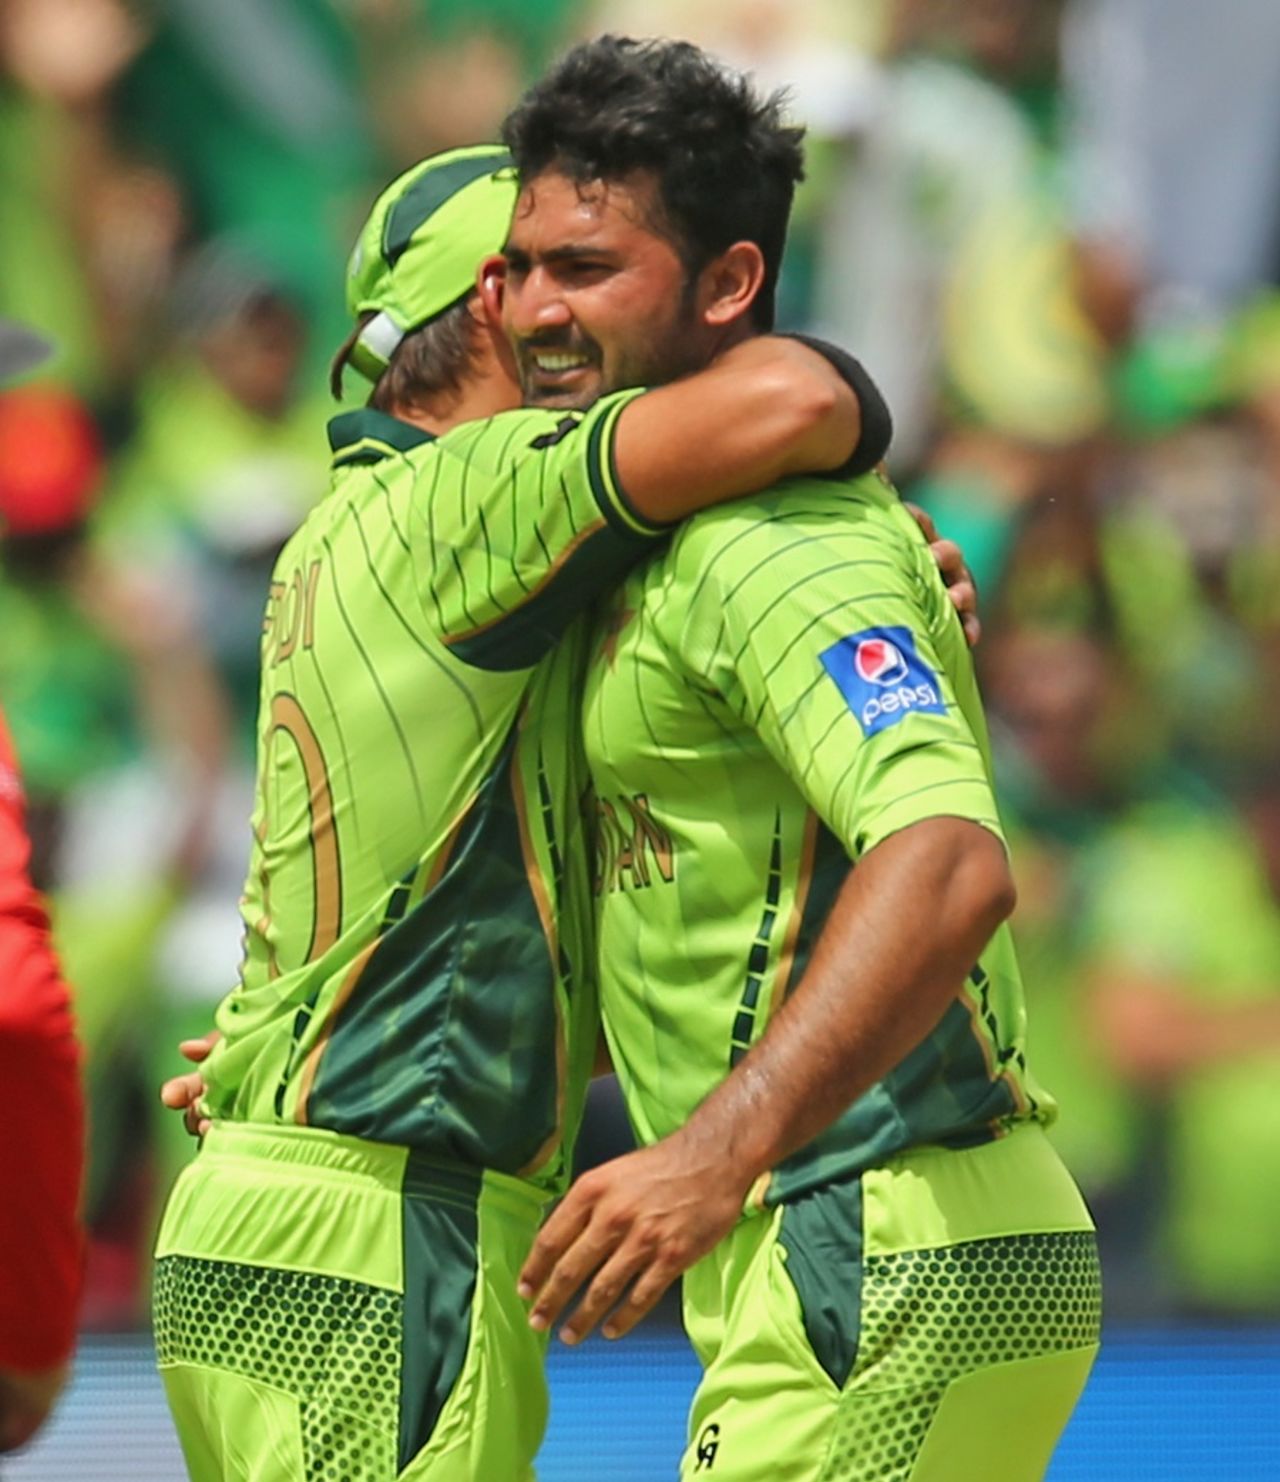 Sohail Khan removed Rohit Sharma in the eighth over, India v Pakistan, World Cup 2015, Group B, Adelaide, February 15, 2015